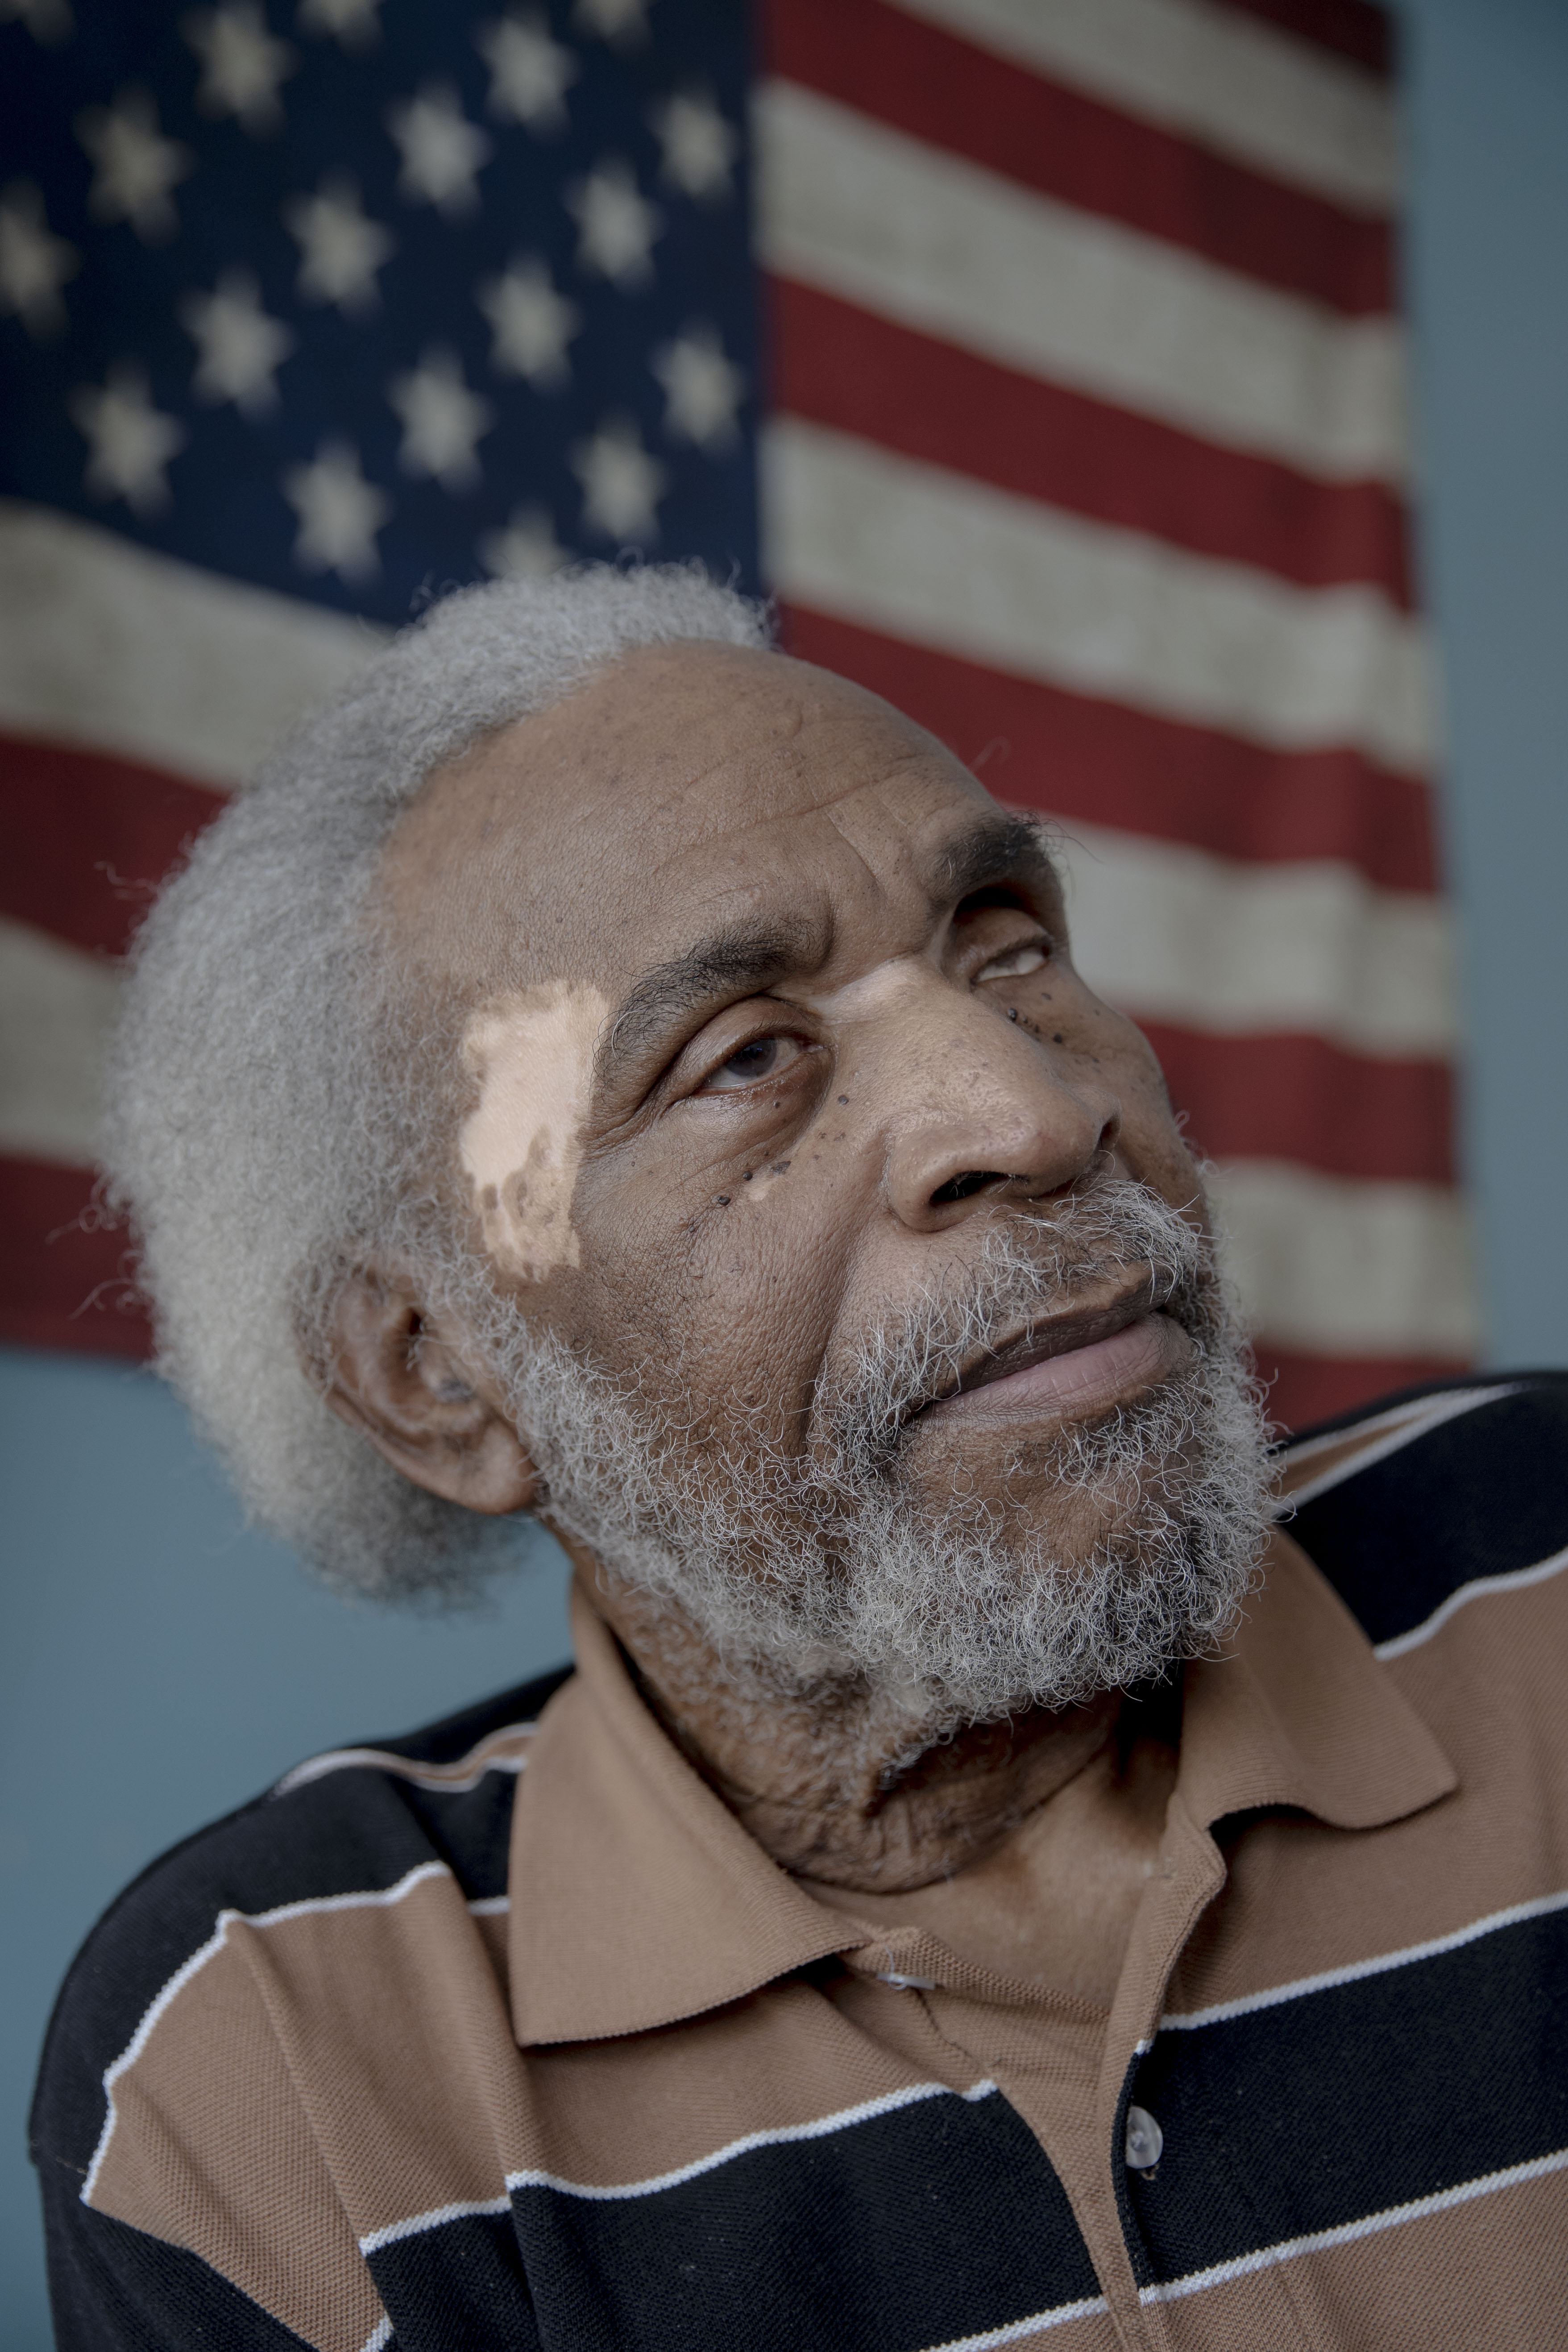 “Many times, I’ve felt like I was starving,” says veteran Eugene Milligan who is blind, lost half his right leg to diabetes, gets dialysis for kidney failure and has struggled to get enough to eat at his Memphis home. (Andrea Morales for Kaiser Health)